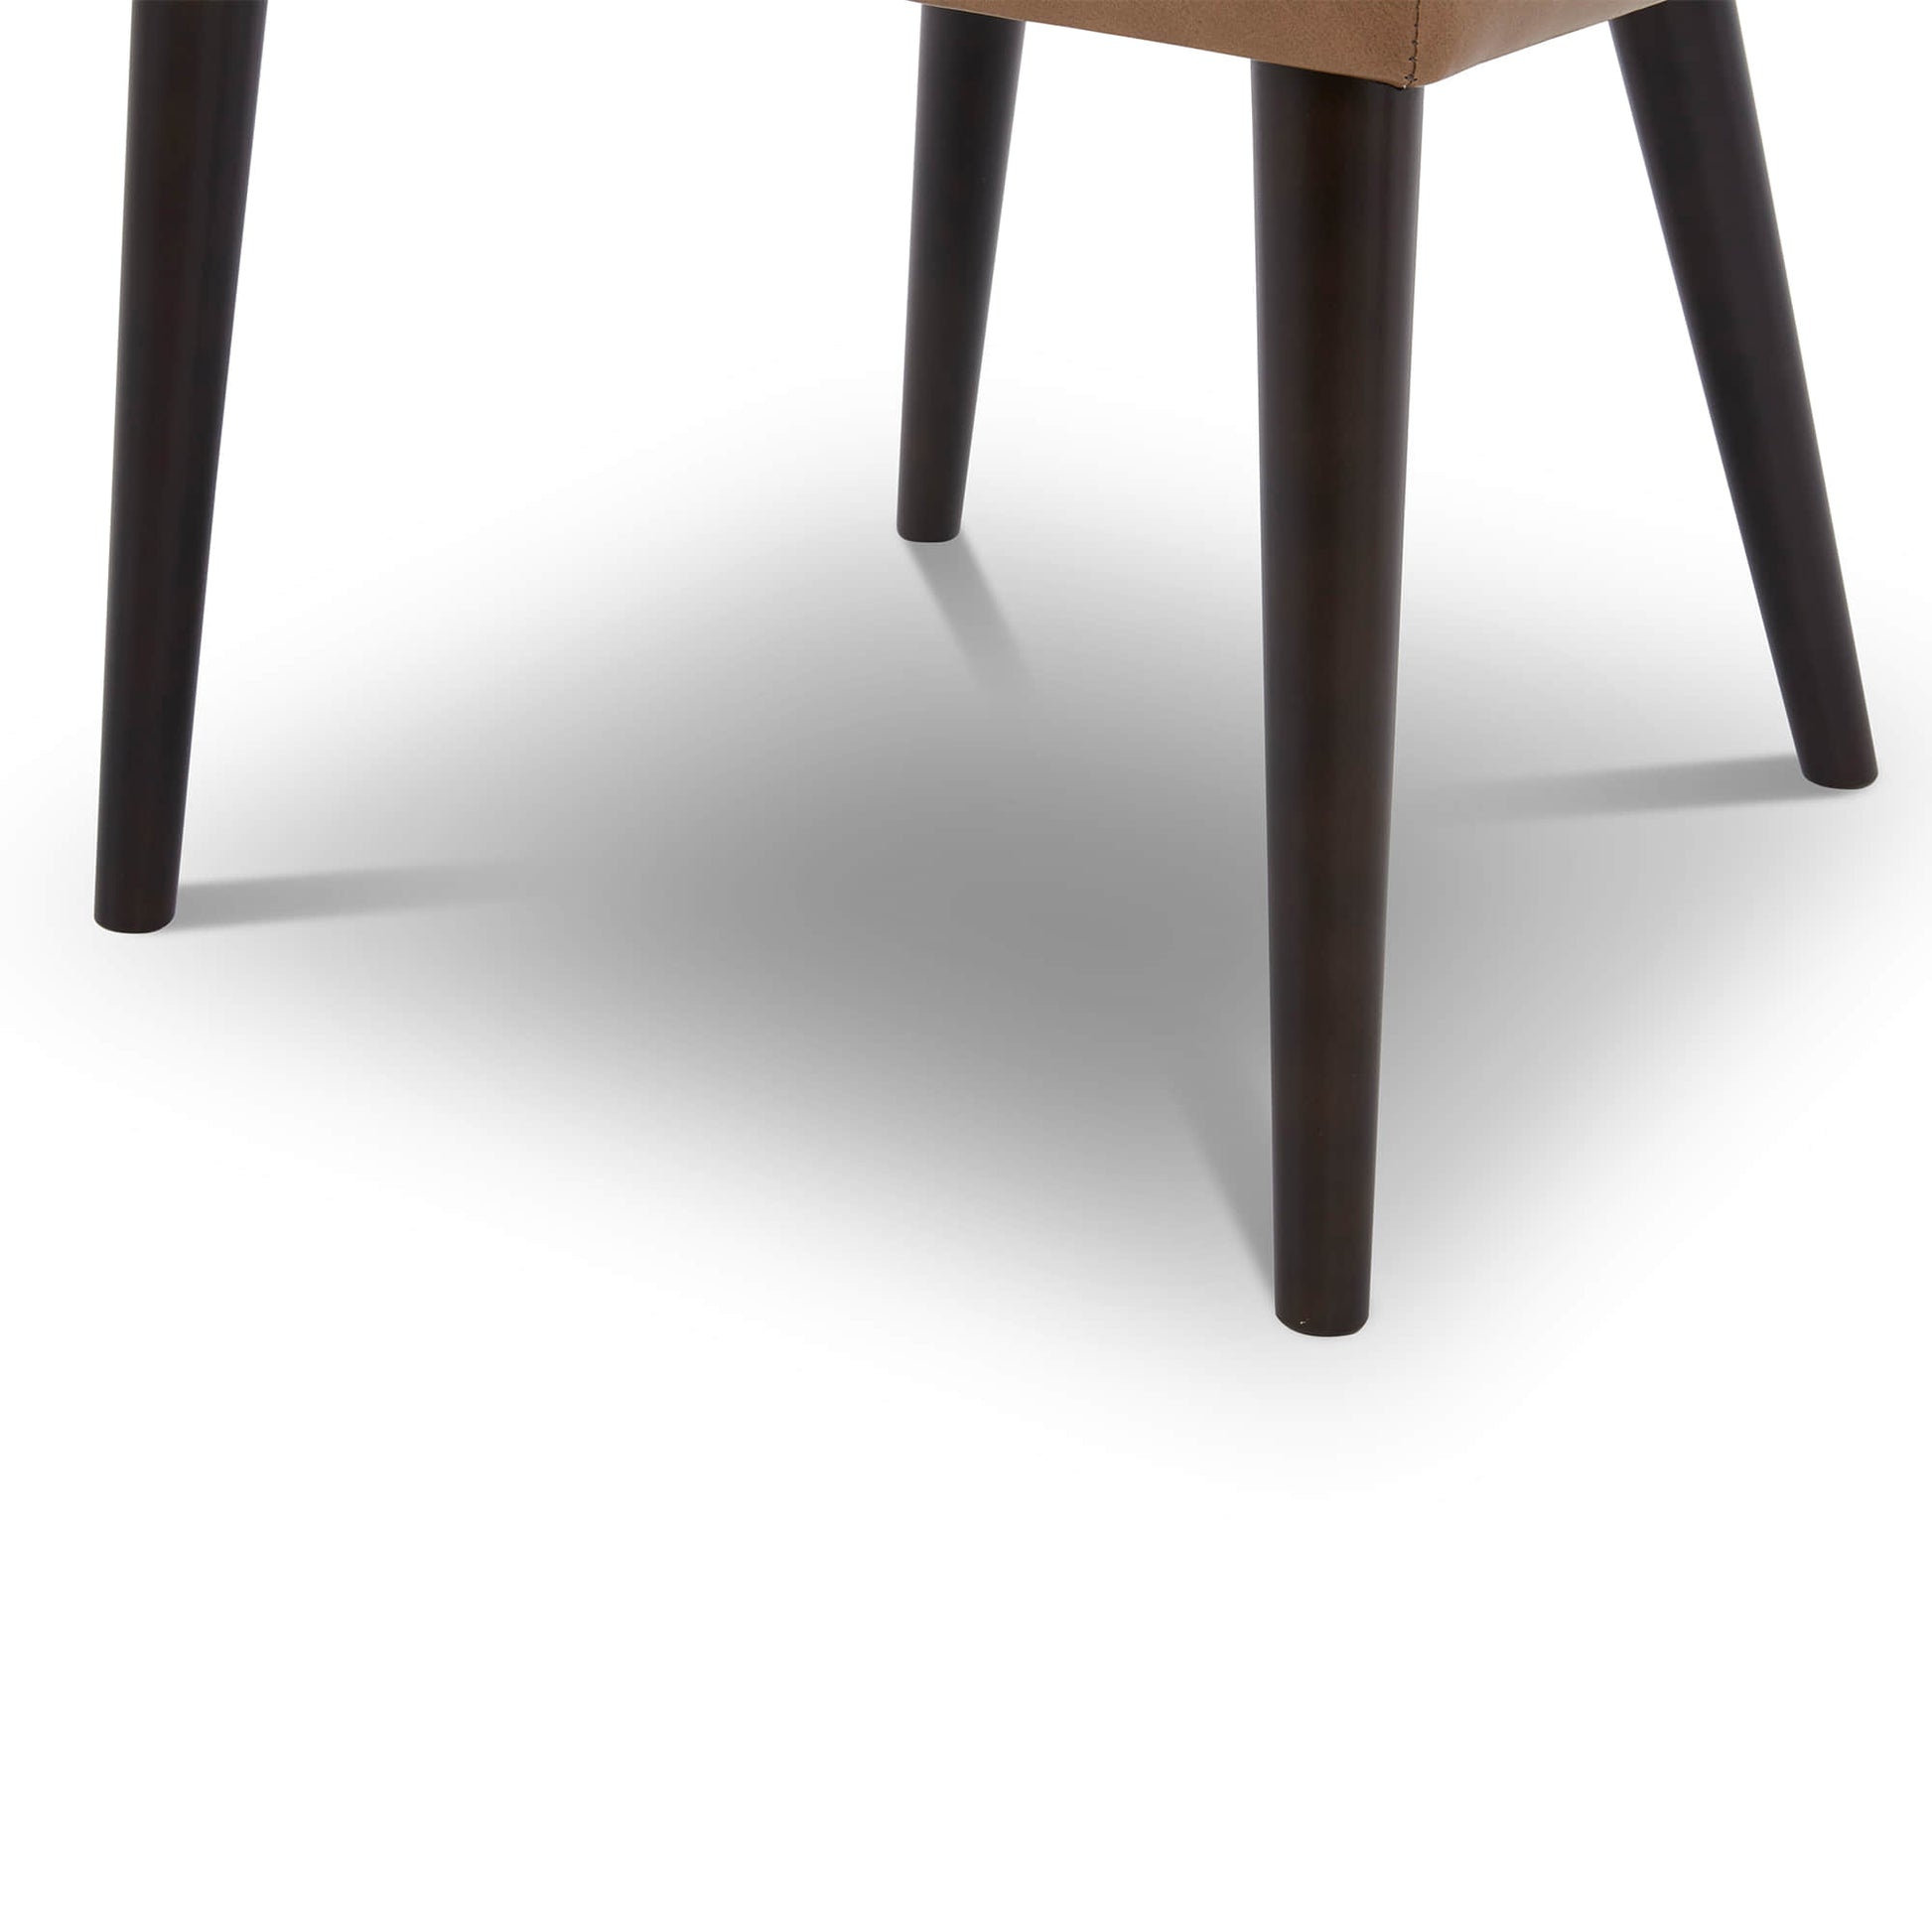 CHITA LIVING-Rhett Dining Chair (Set of 2)-Dining Chairs-Faux Leather-Retro Brown-